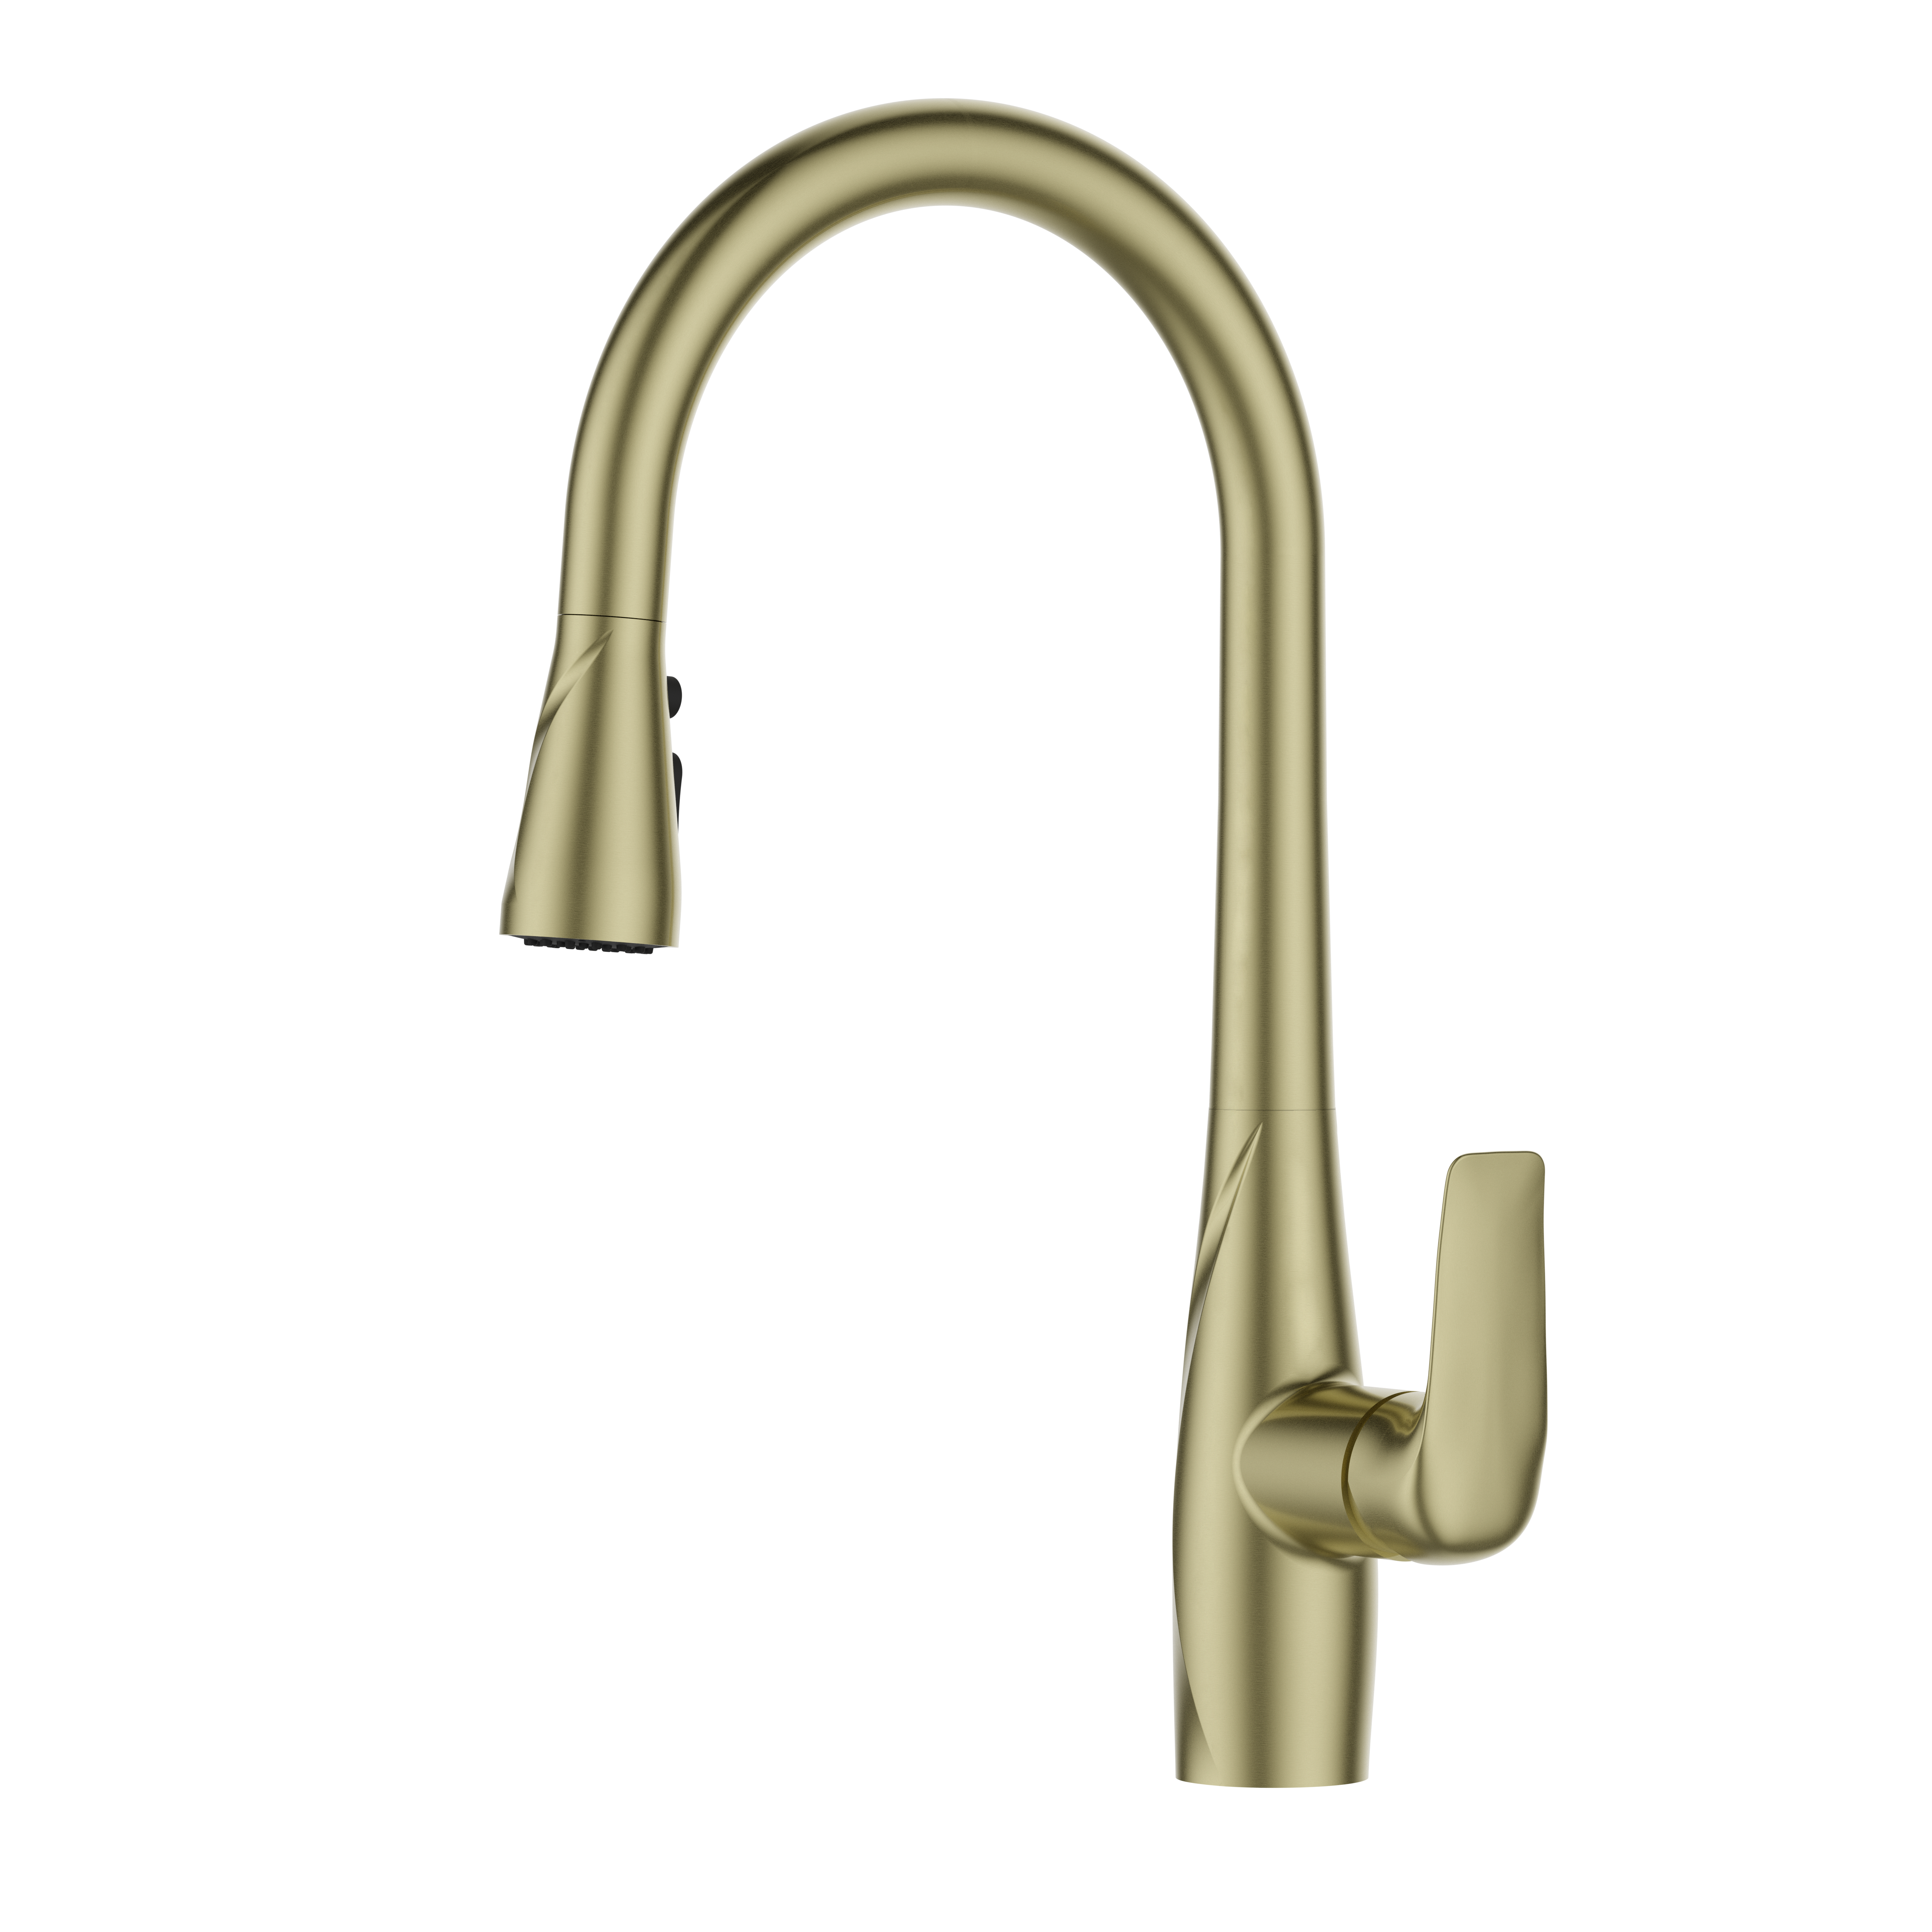  Brushed Gold Kitchen Faucet Single Handle